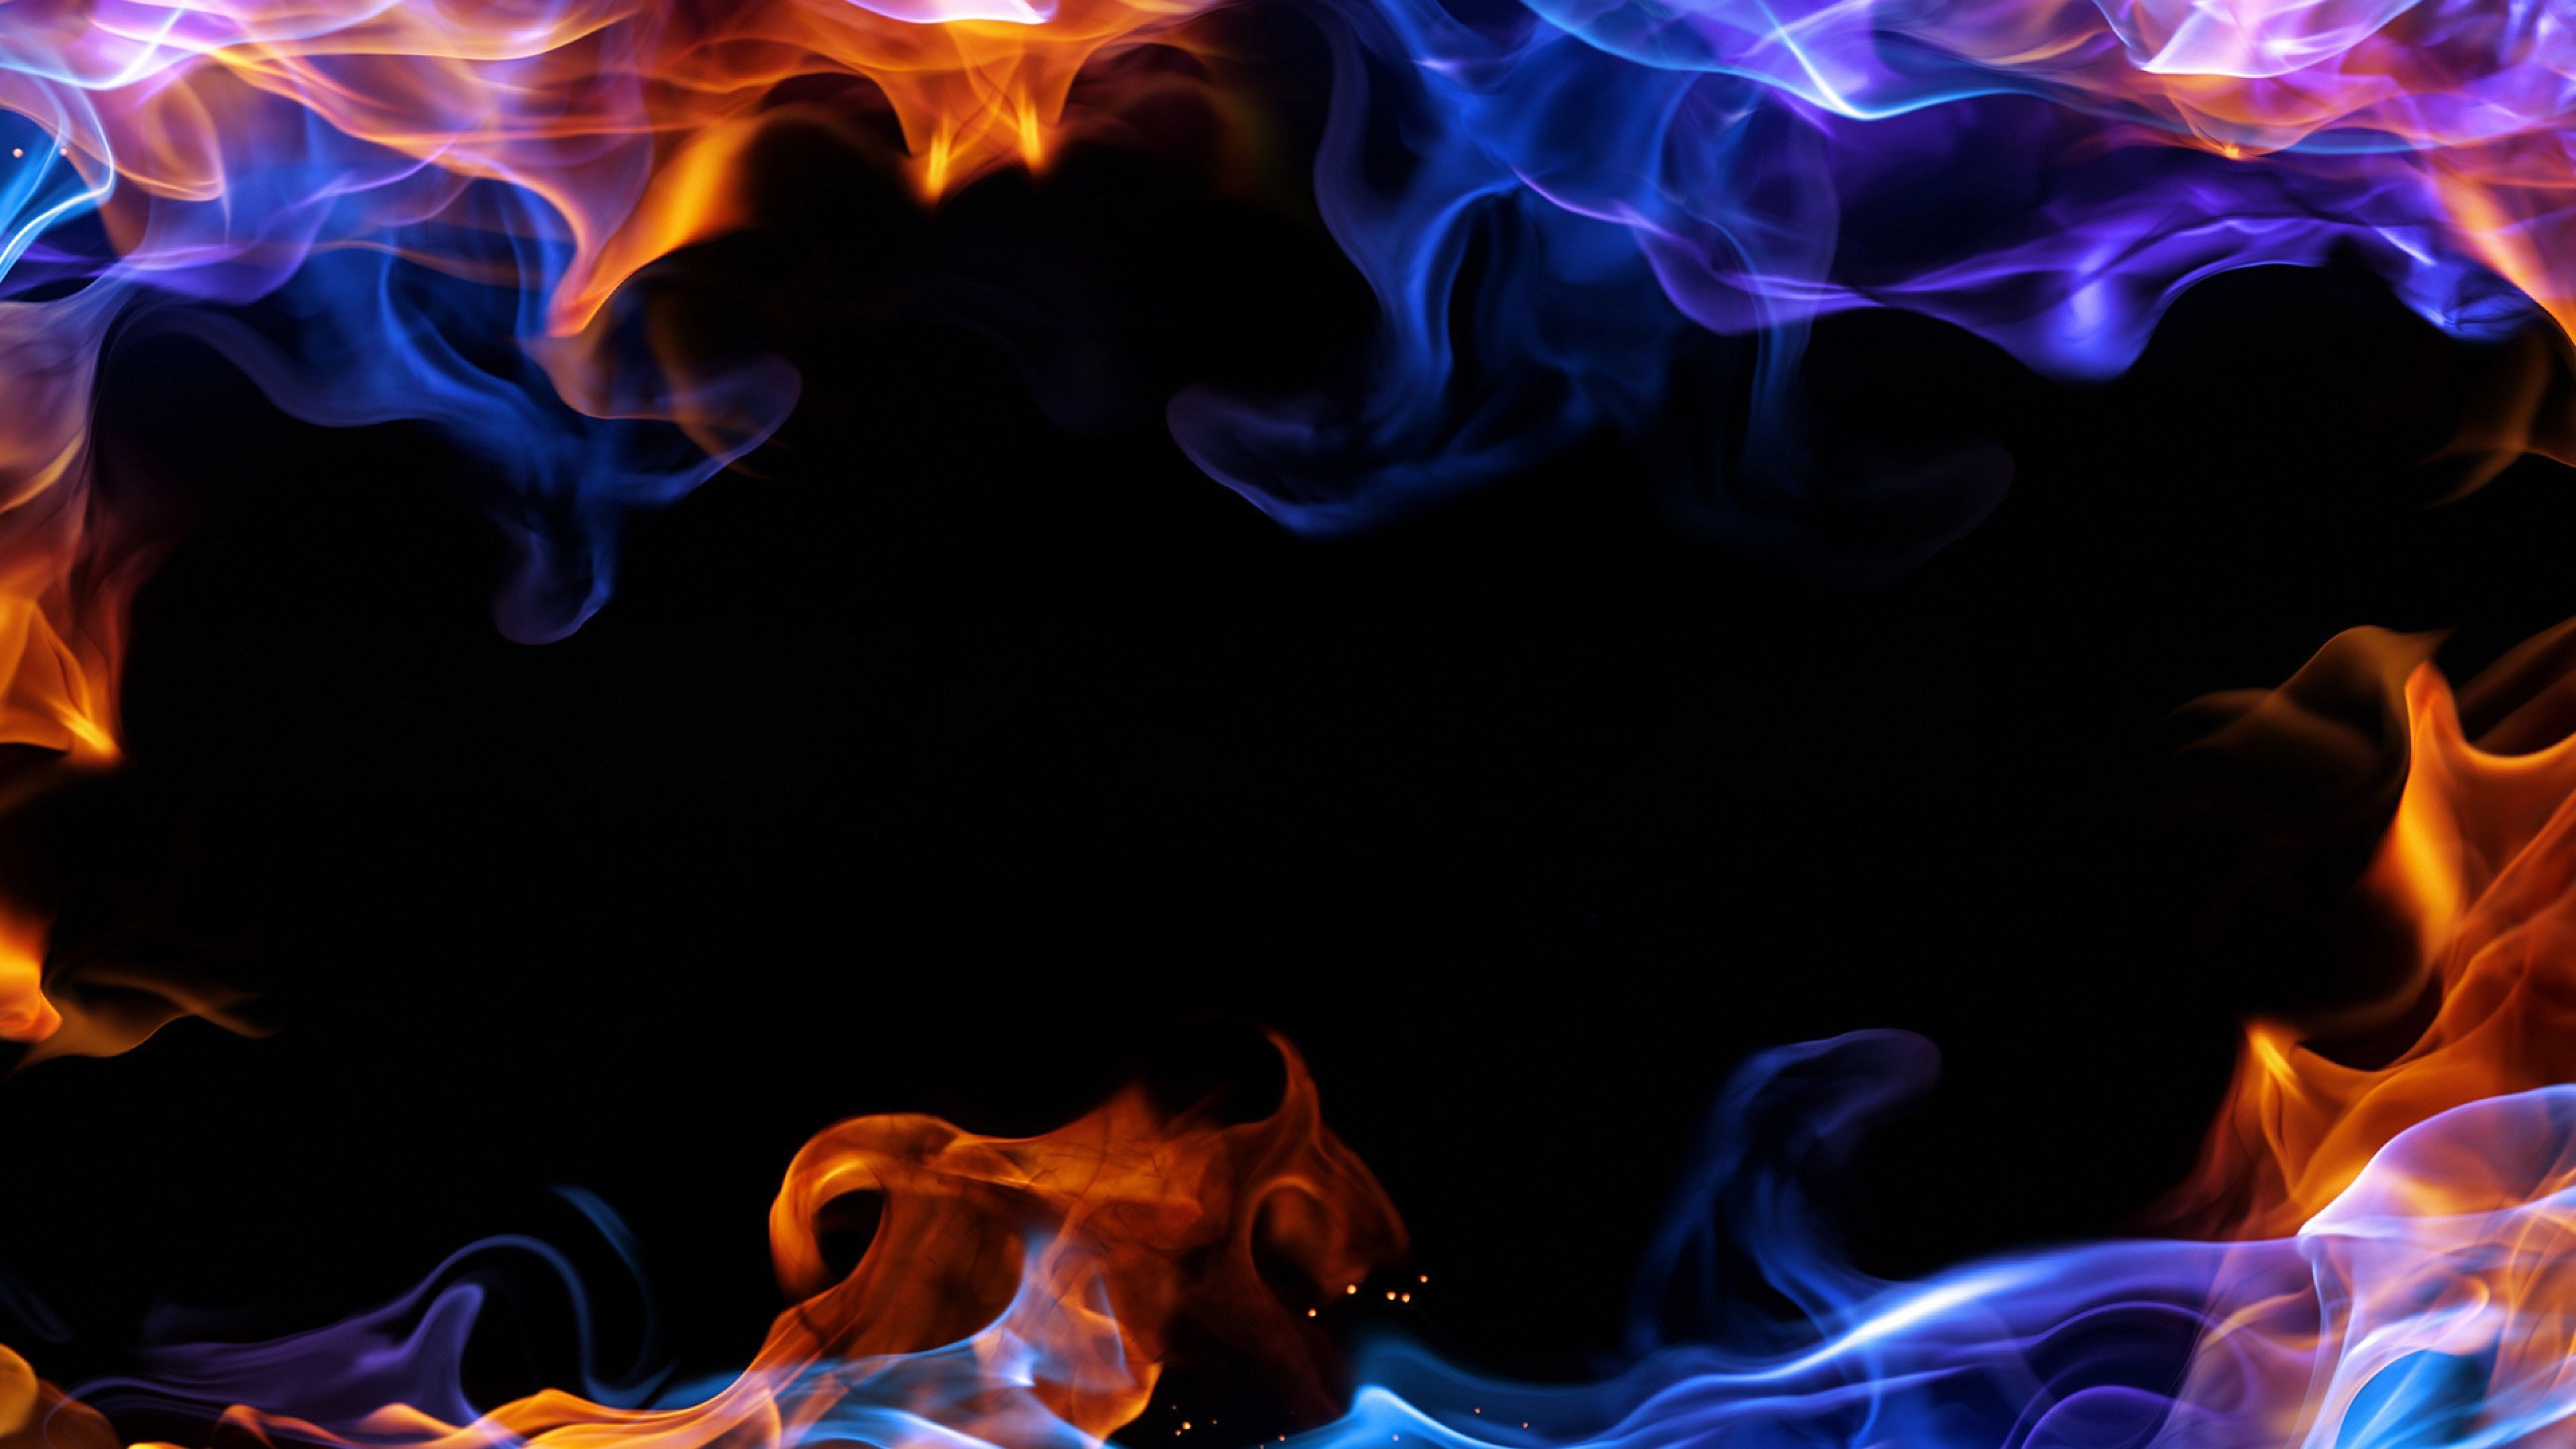 Download Wallpaper 3840x2160 Smoke, Background, Play of light ...